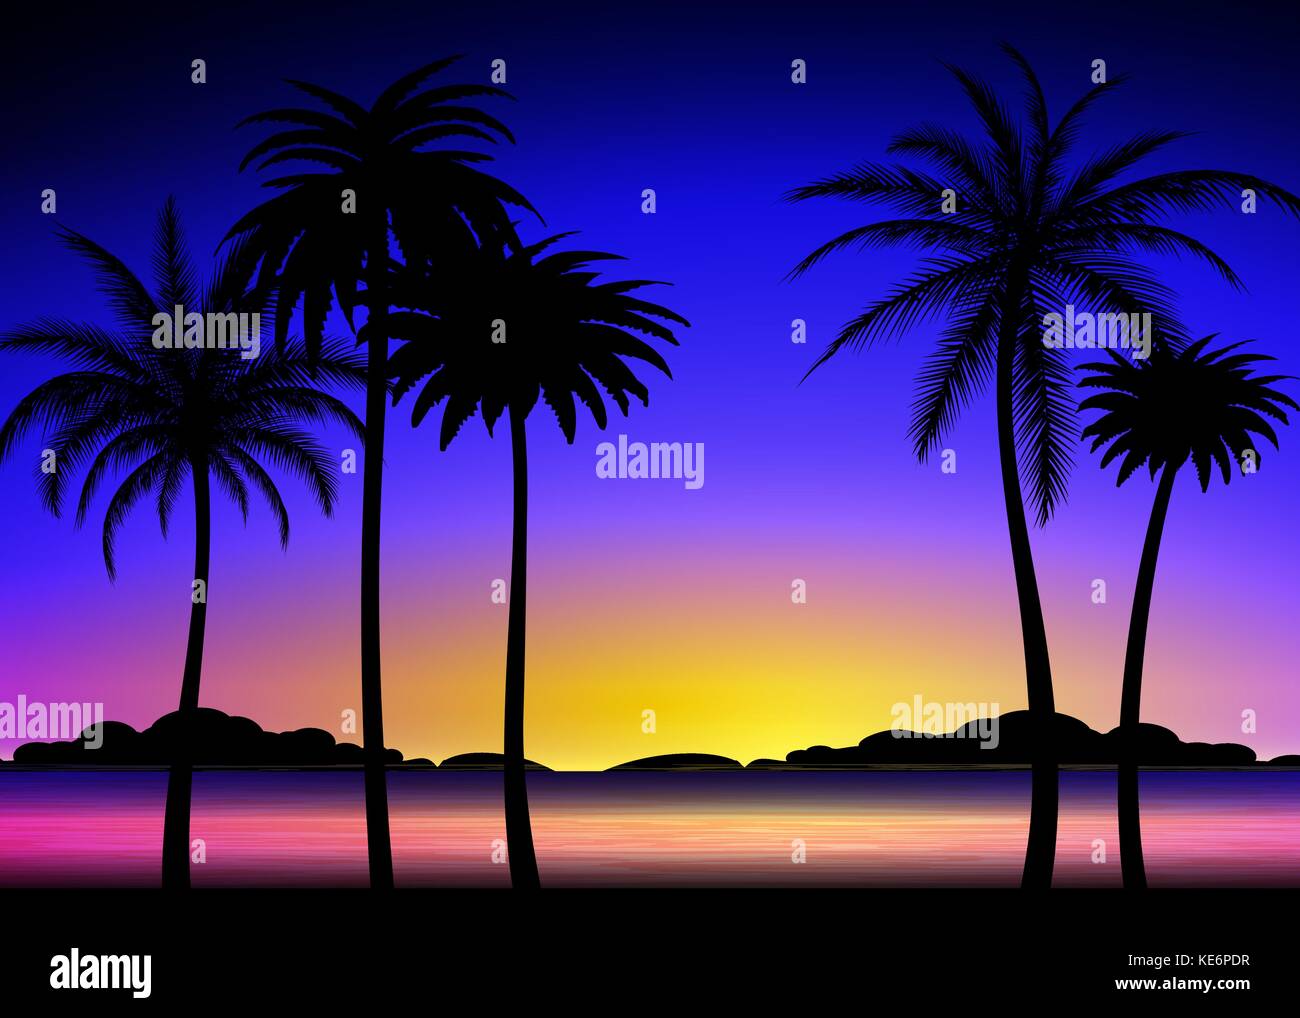 Silhouette of palms on tropical sunset Stock Vector